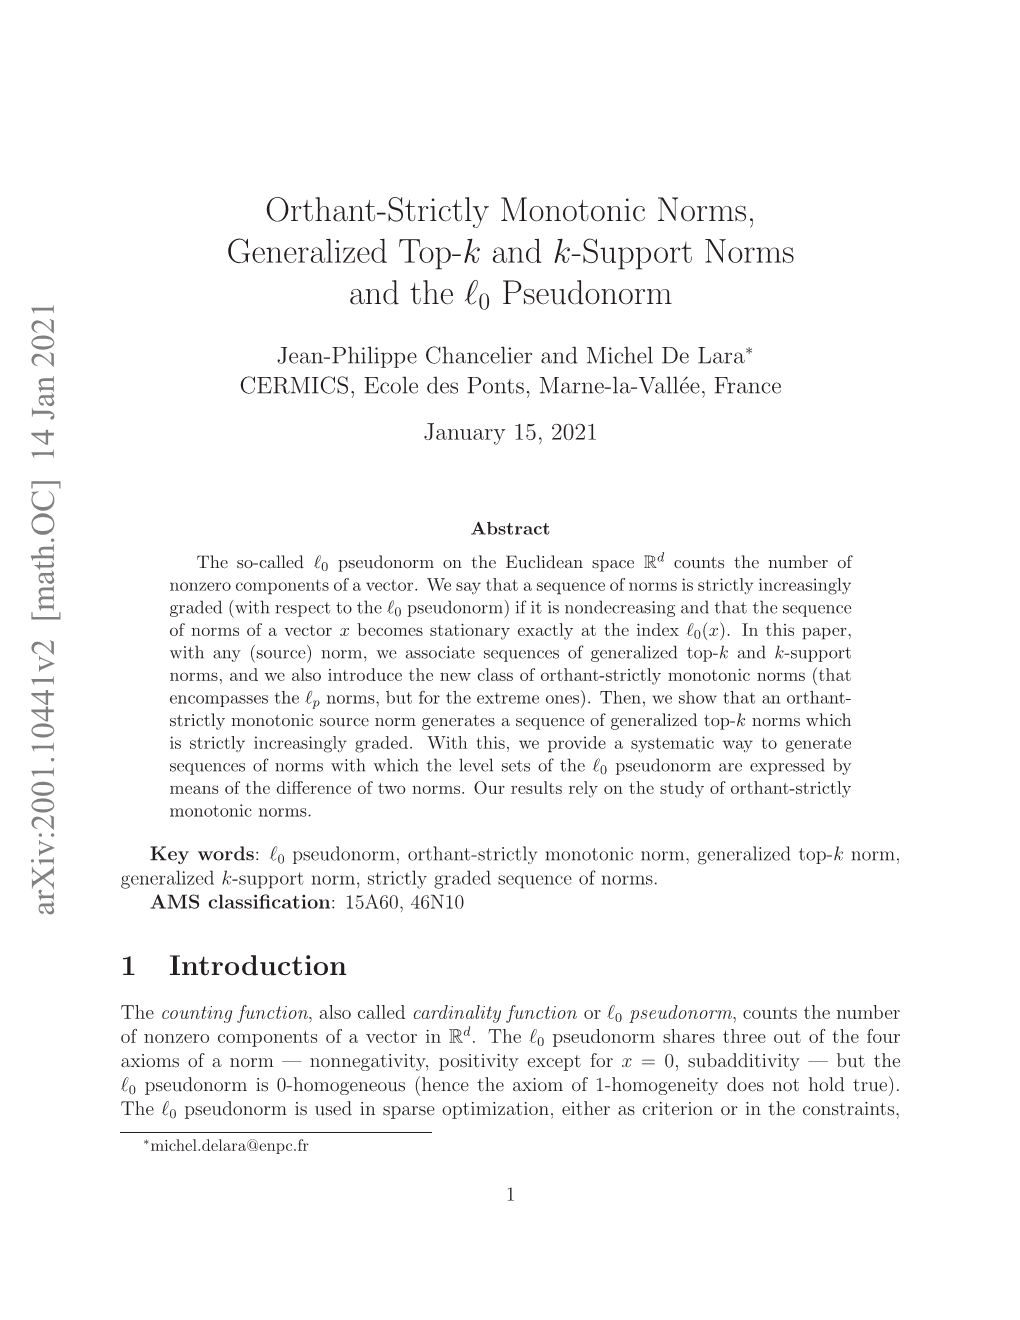 Orthant-Strictly Monotonic Norms, Generalized Top-K and K